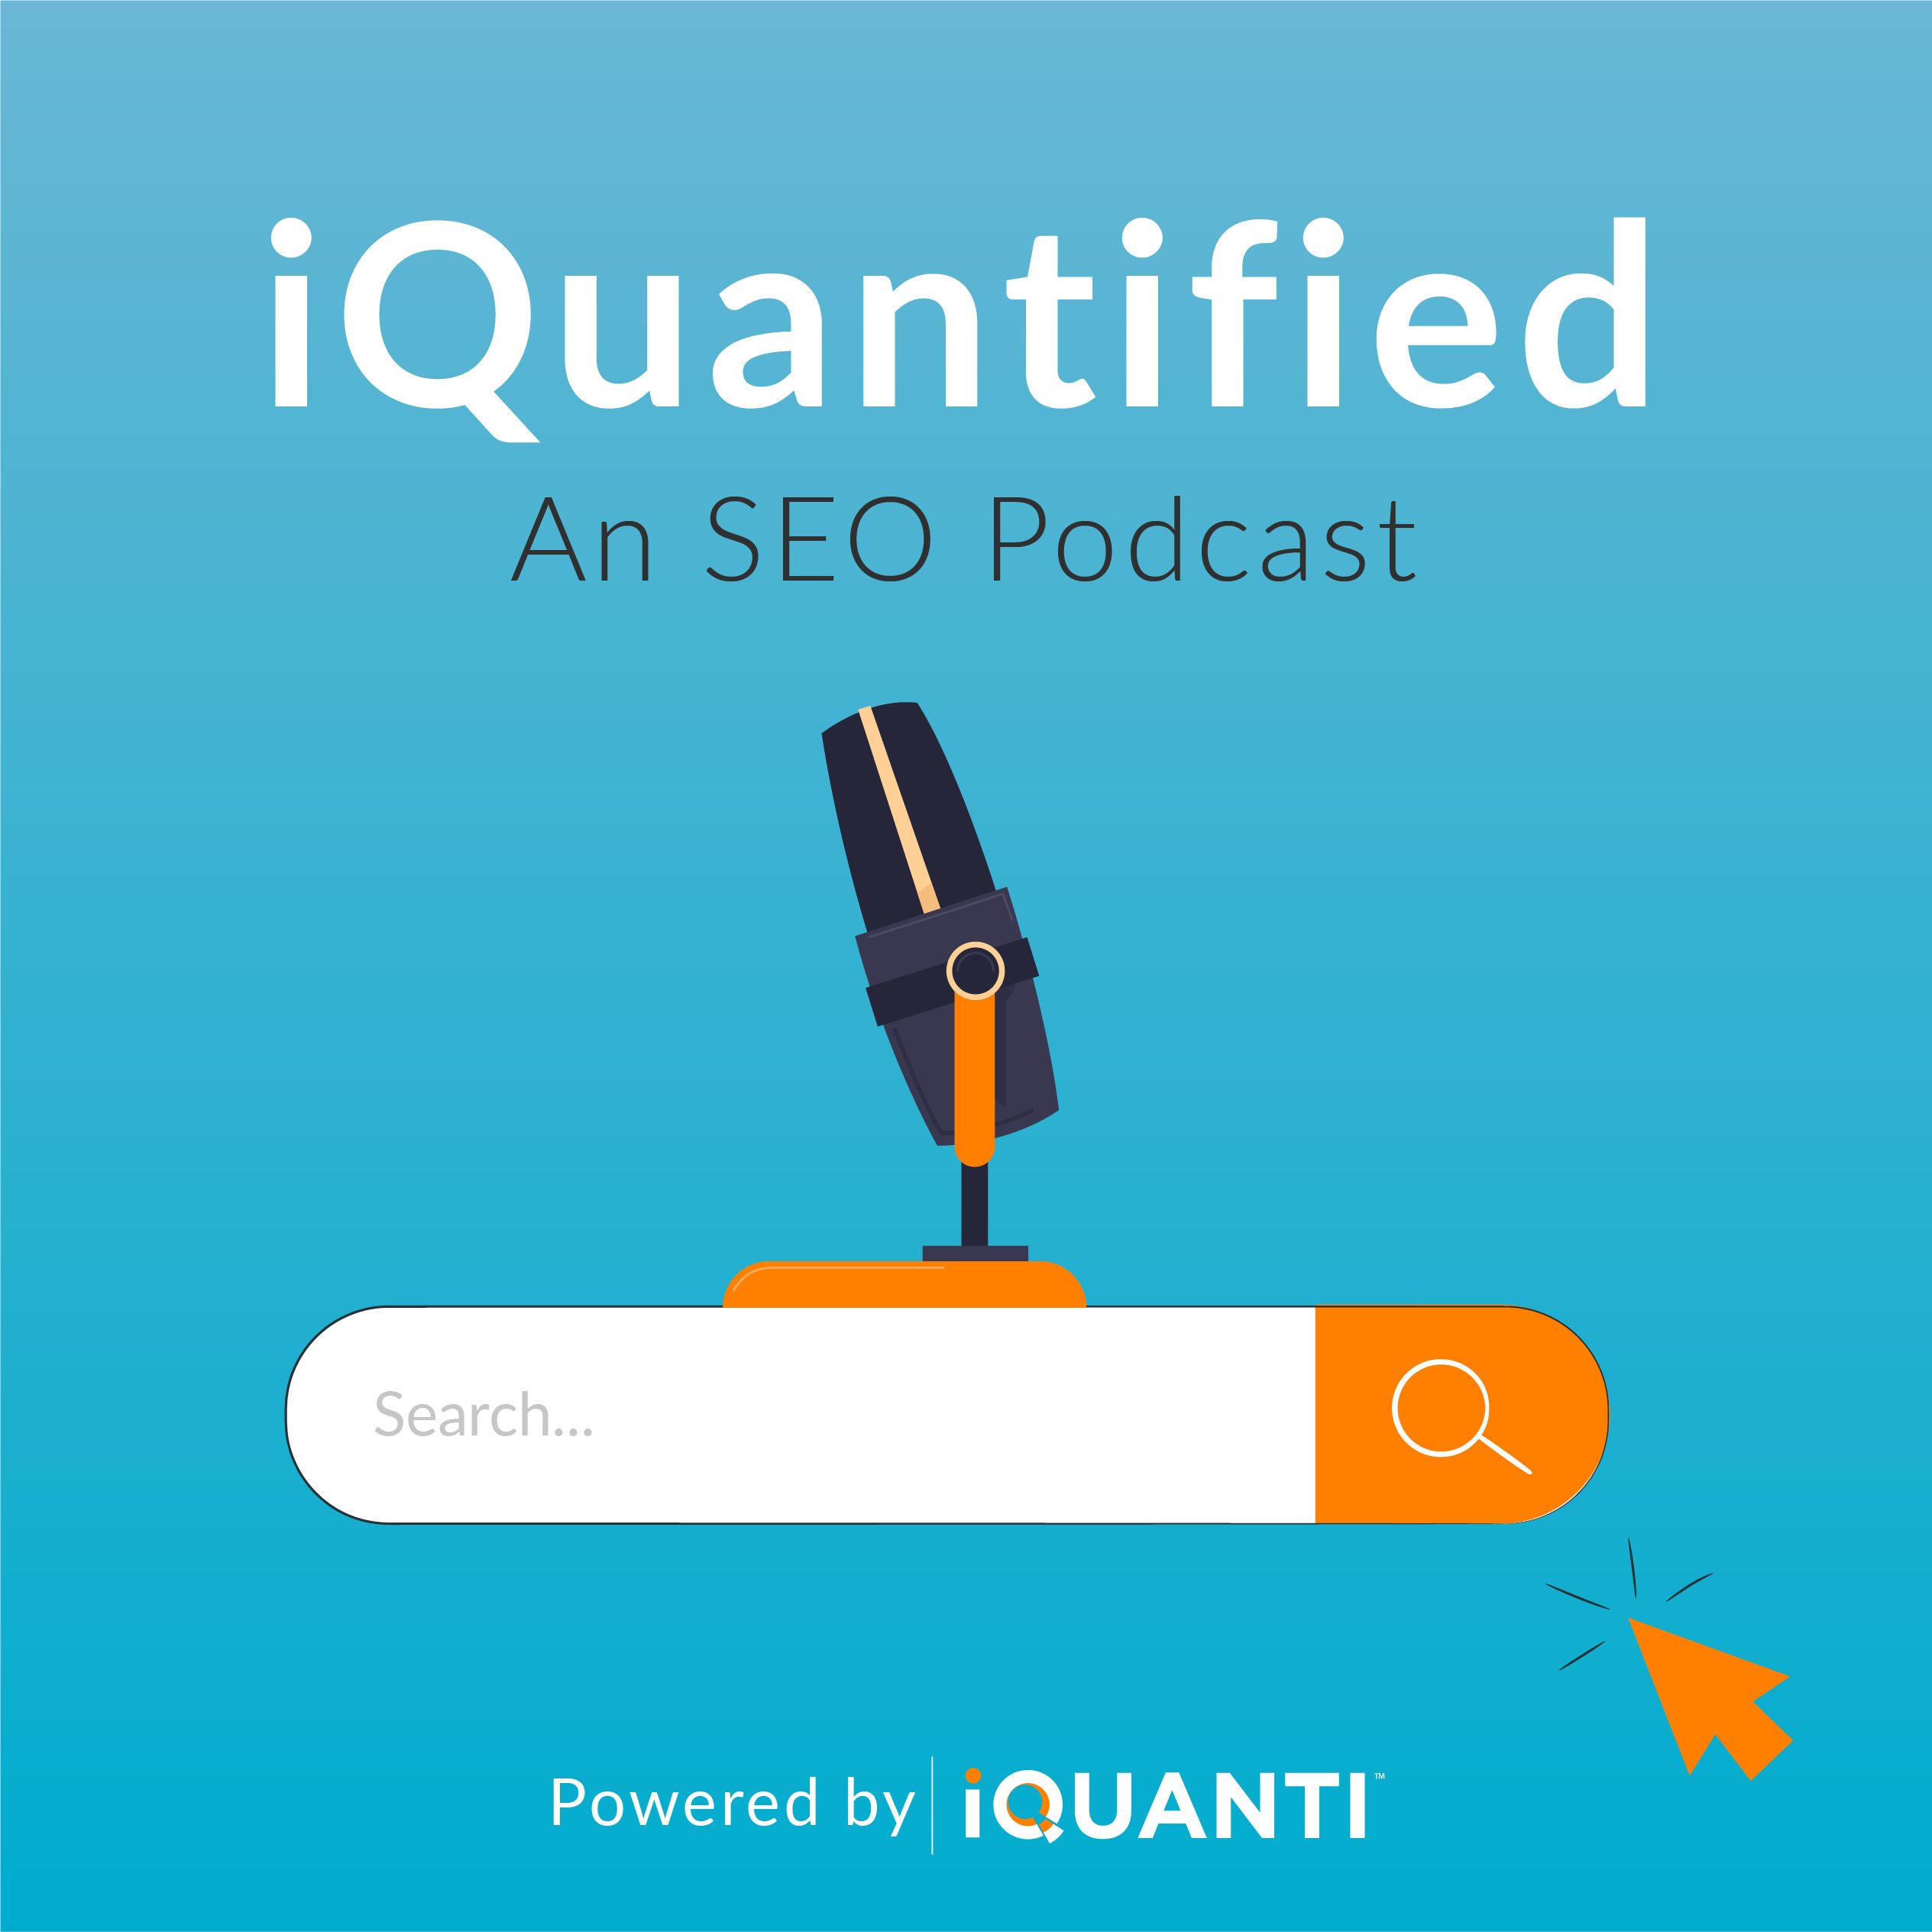 iQuantified: An SEO Podcast